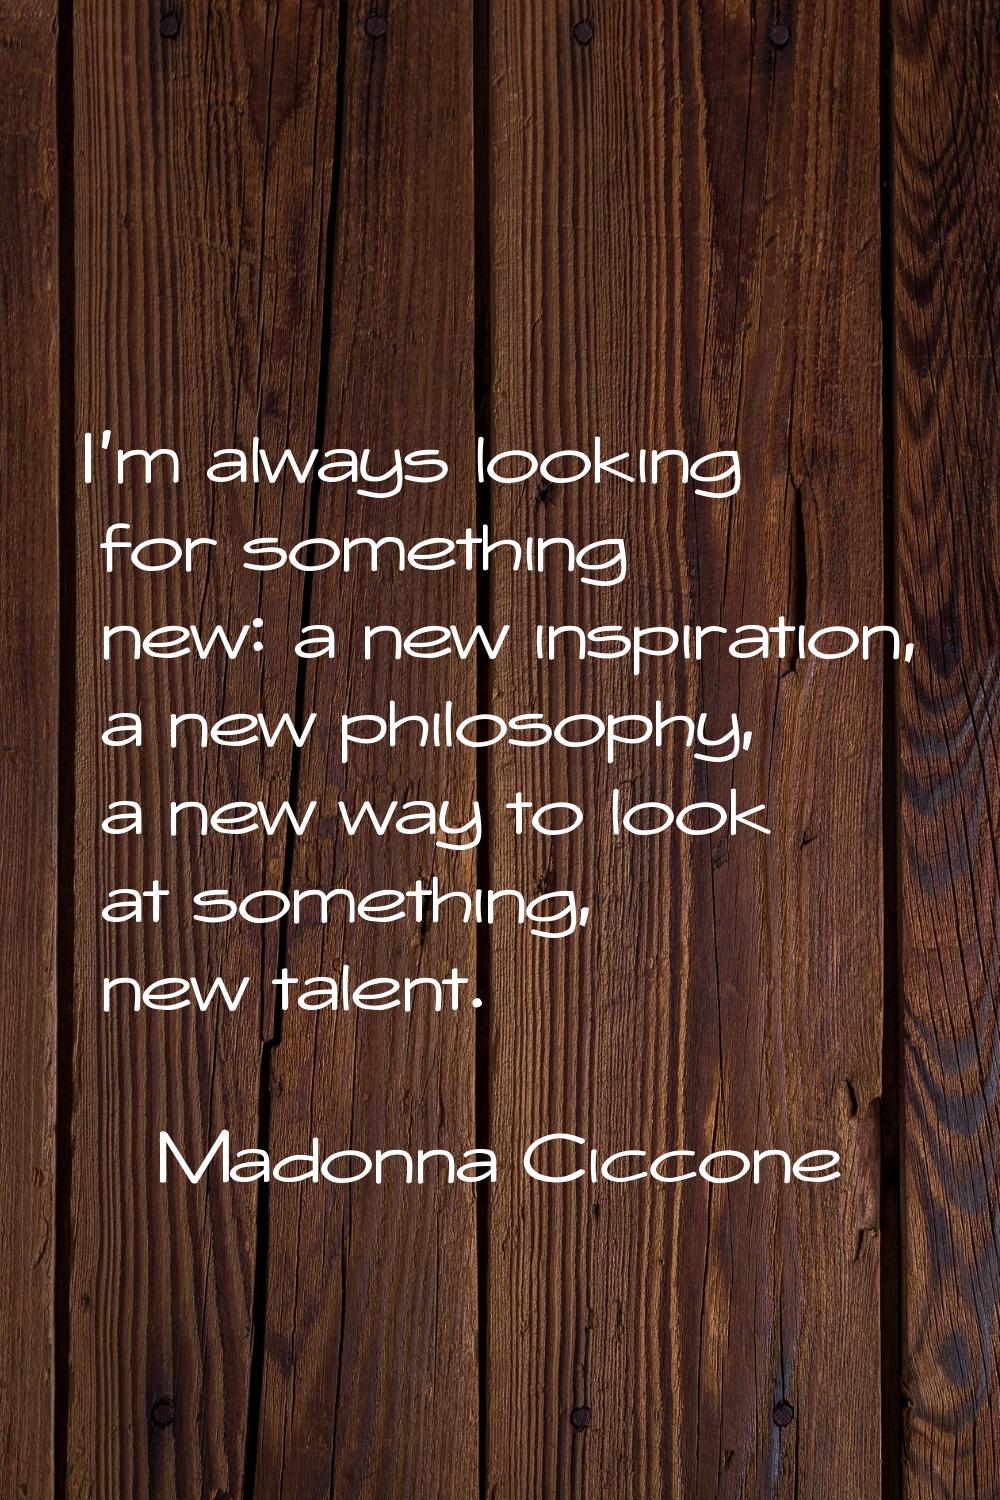 I'm always looking for something new: a new inspiration, a new philosophy, a new way to look at som